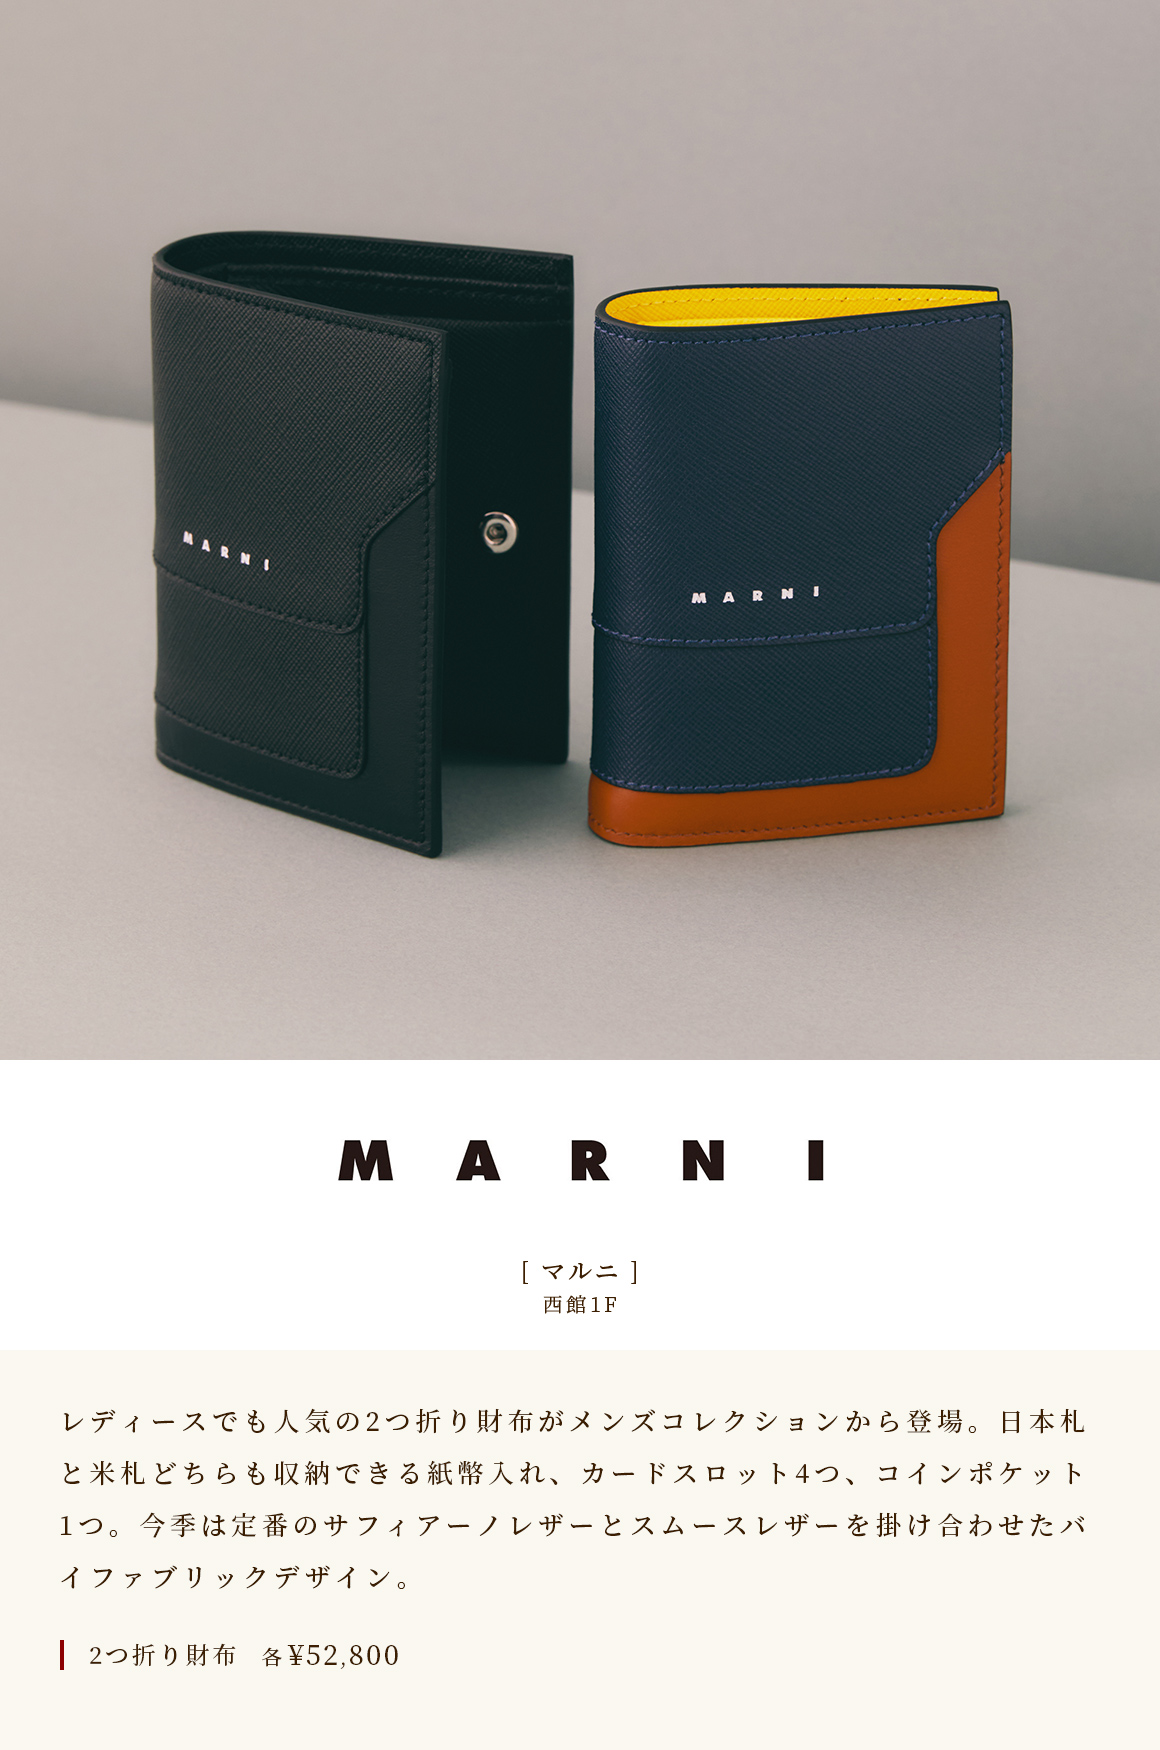 [Marni] WEST WING 1F A popular bi-fold wallet for ladies is now available from the men's collection. A bill compartment that can store both Japanese and US bills, 4 card slots, and 1 coin pocket. This season's bi-fabric design is a combination of classic Saffiano leather and smooth leather. Folded wallet ¥ 52,800 each